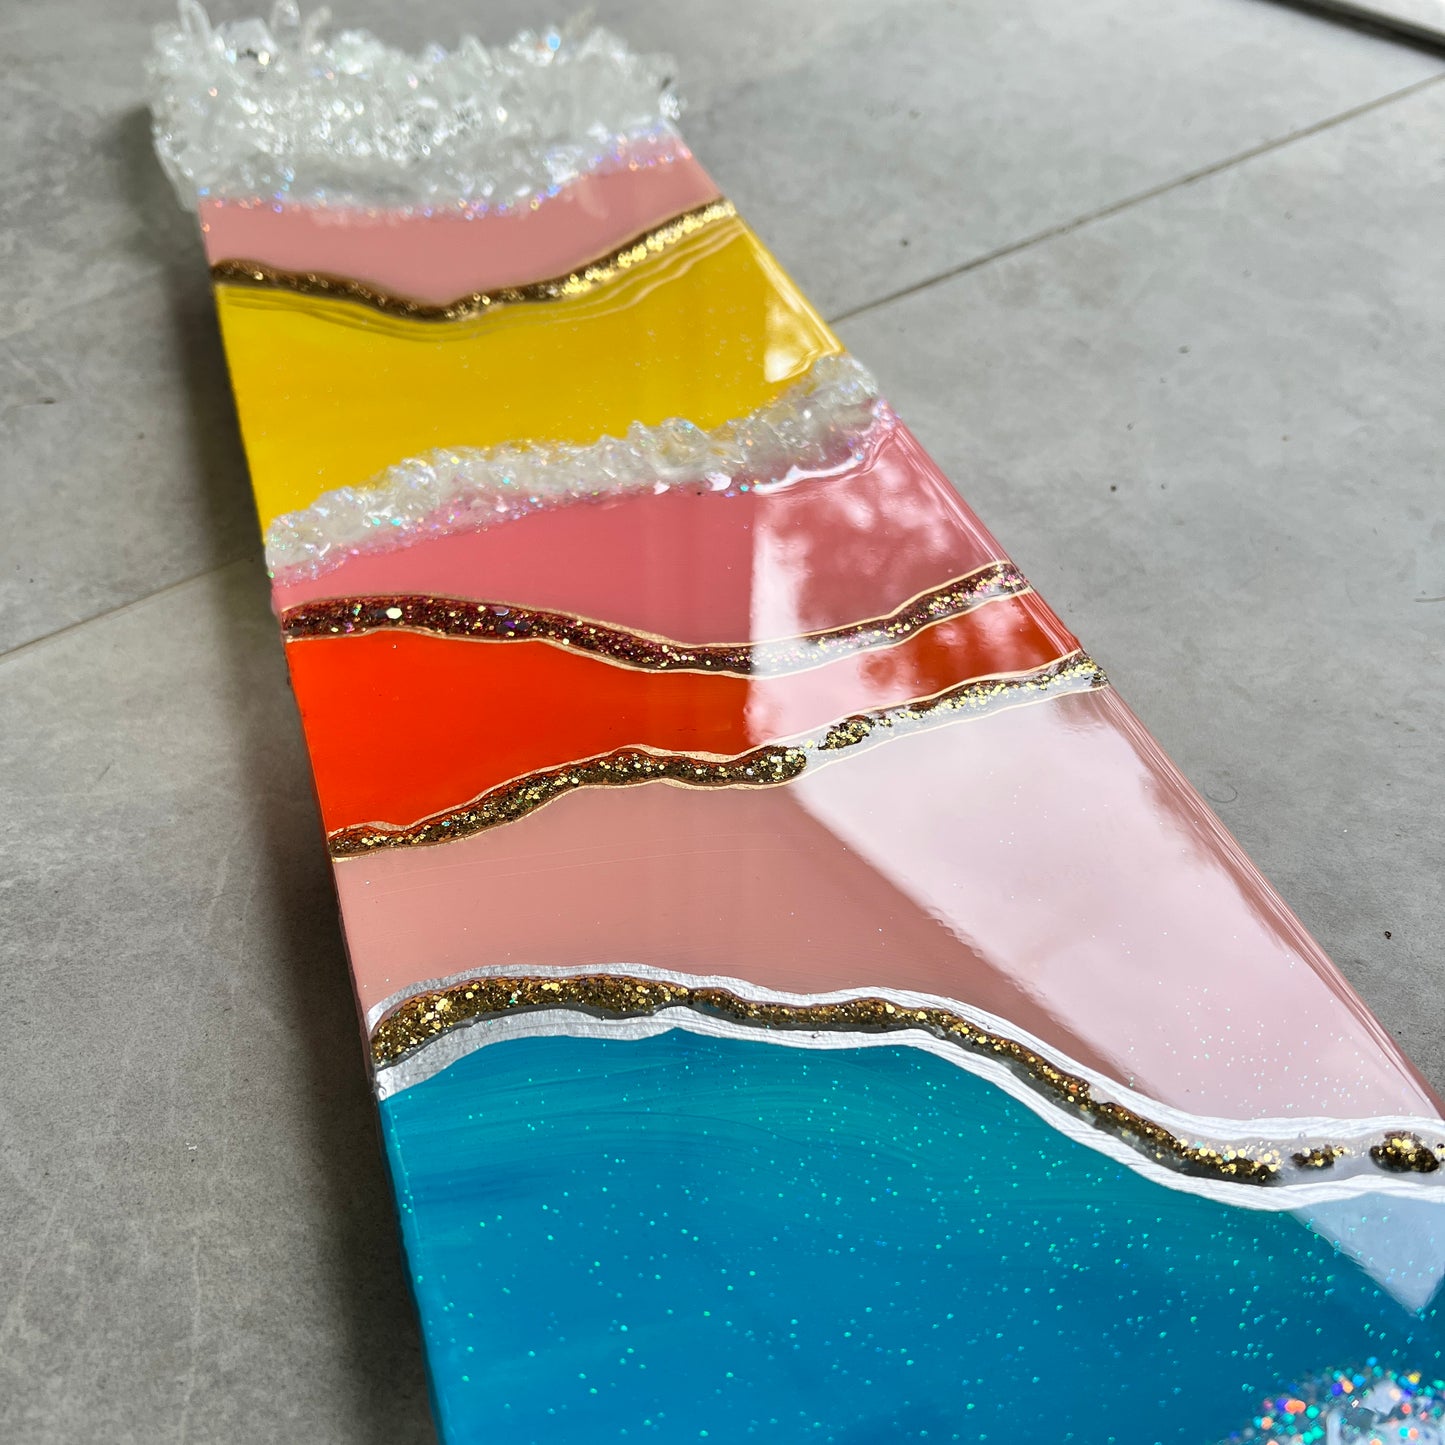 NEW! Colorful layered Resin and Glass Artwork